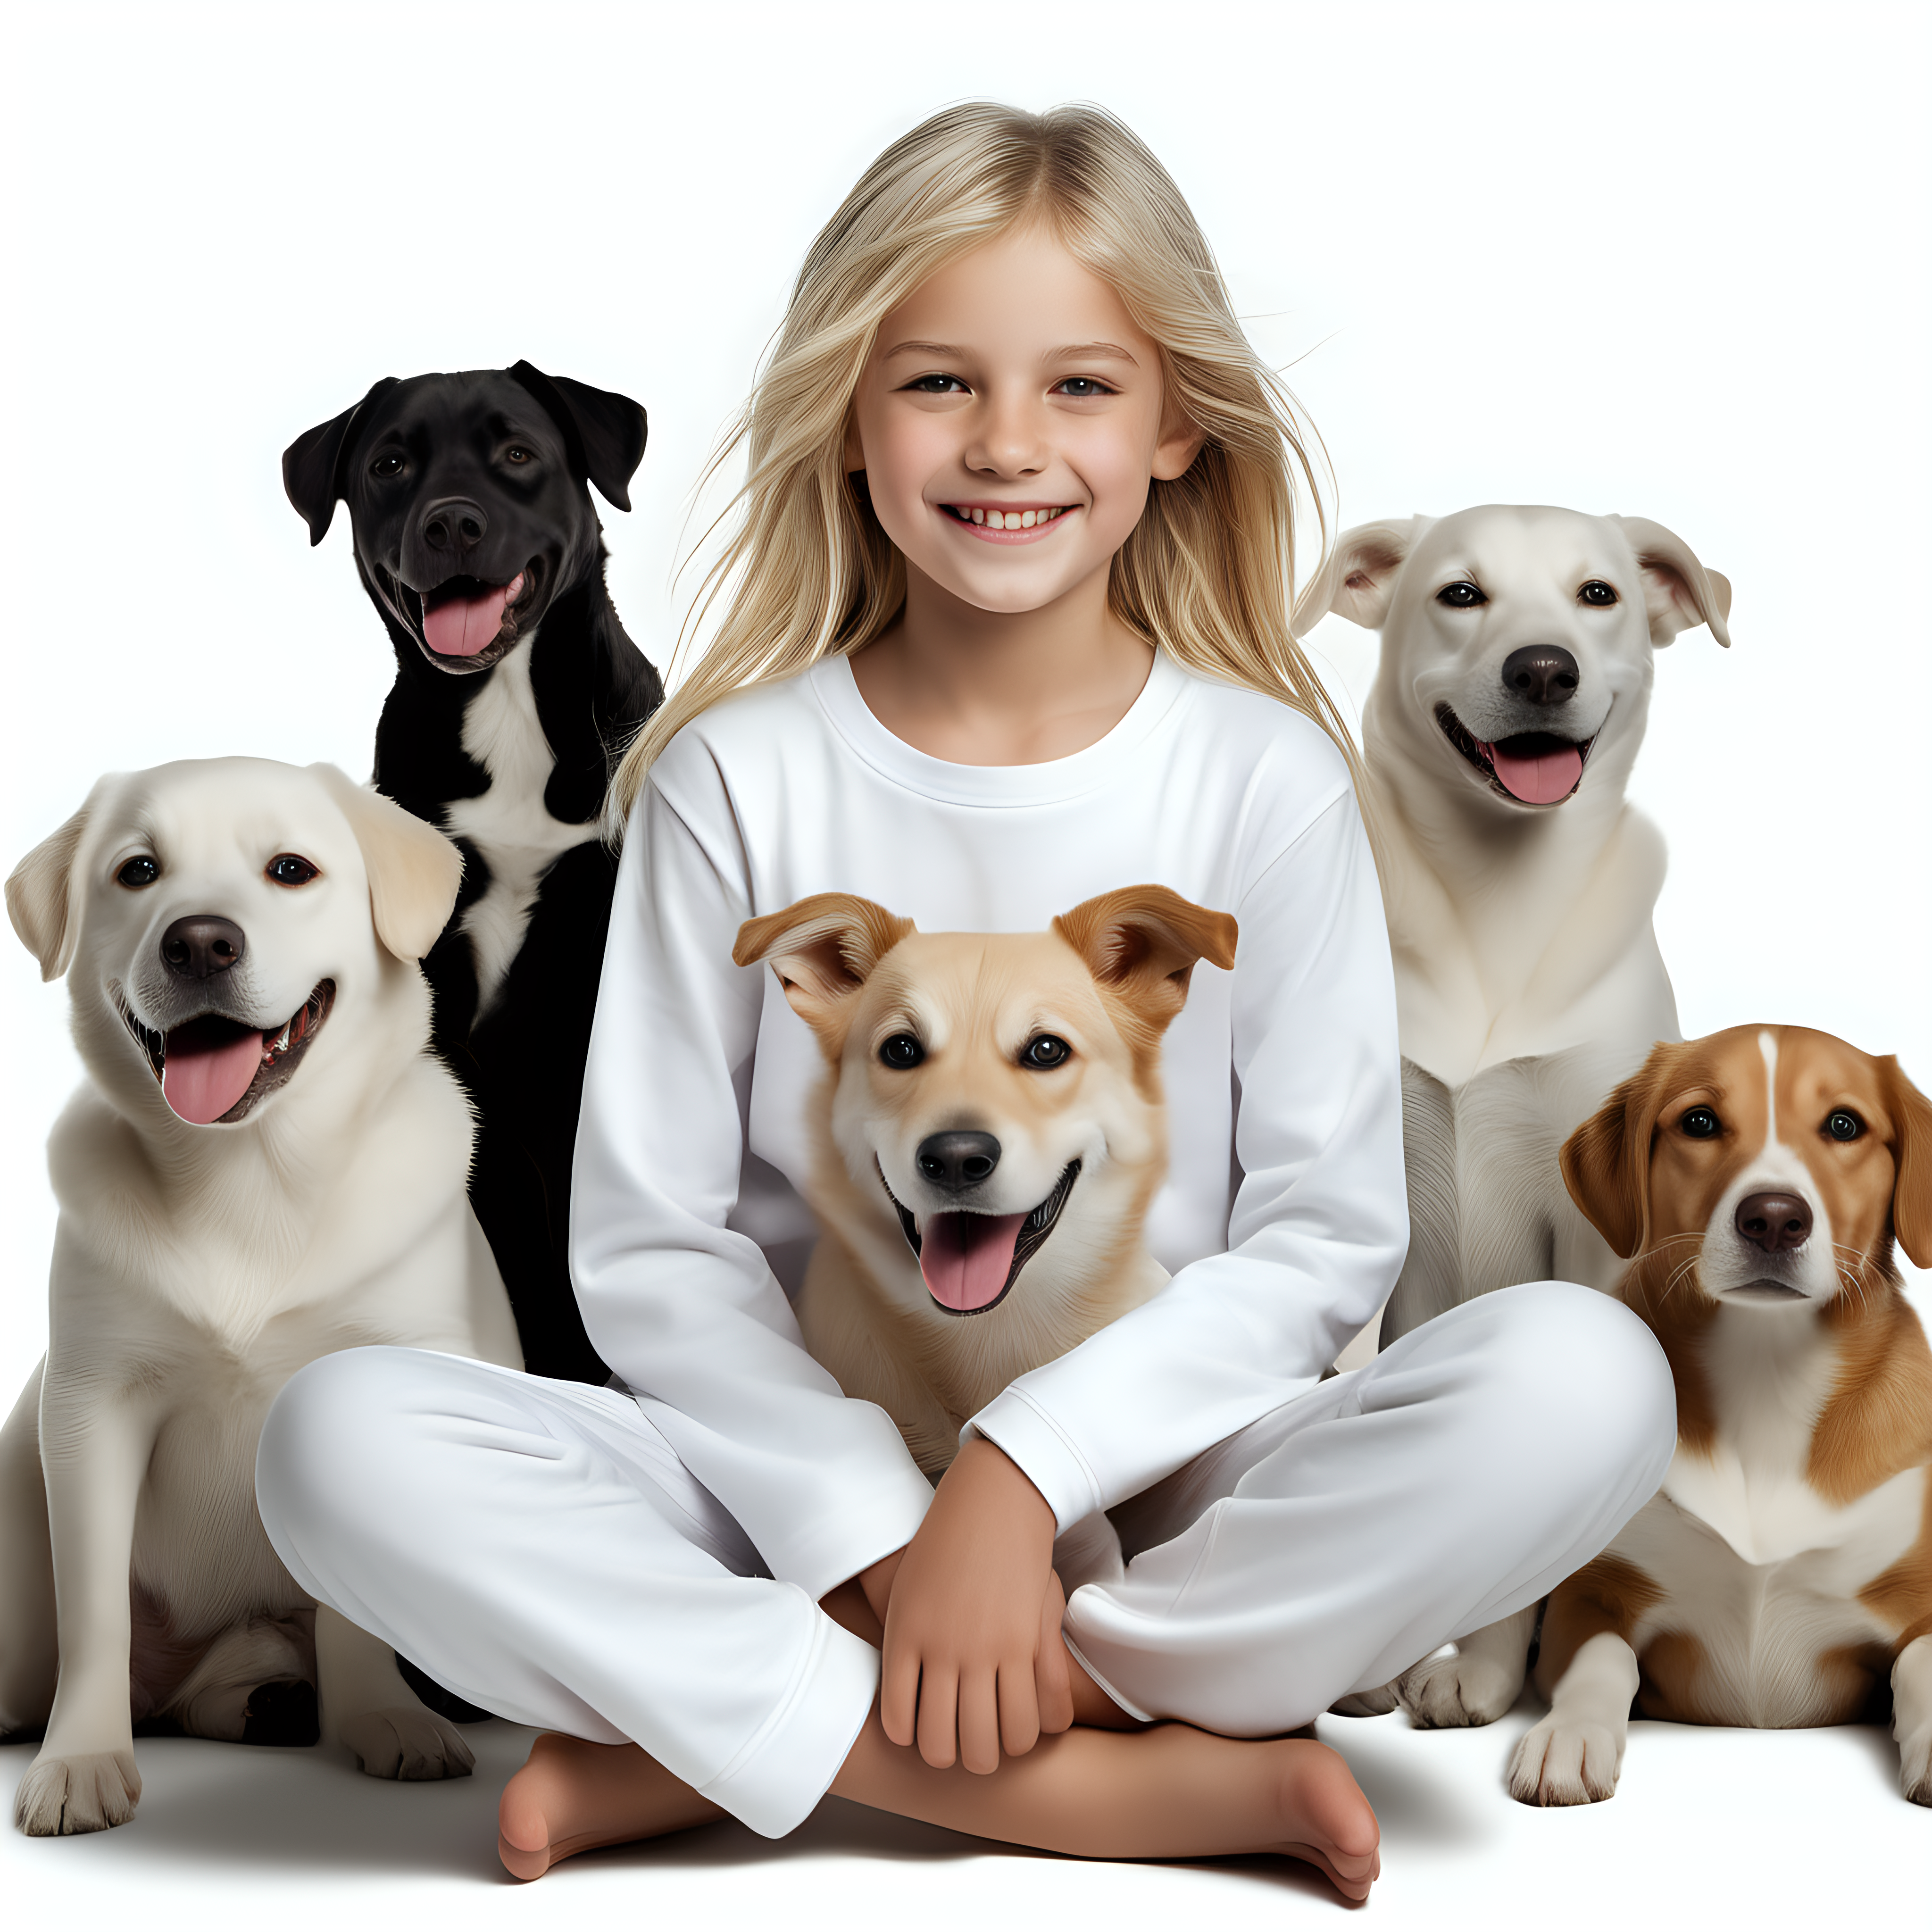 “Perfect Facial Features photo of a blonde smiling 10 year old girl sitting surrounded by dogs, in  white cotton tshirt pyjama (no print, long  tight cuff sleeves, loose long pants) , no background, hyper realistic, ideal face template, HD, happy, Fujifilm X-T3, 1/1250sec at f/2.8, ISO 160, 84mm”